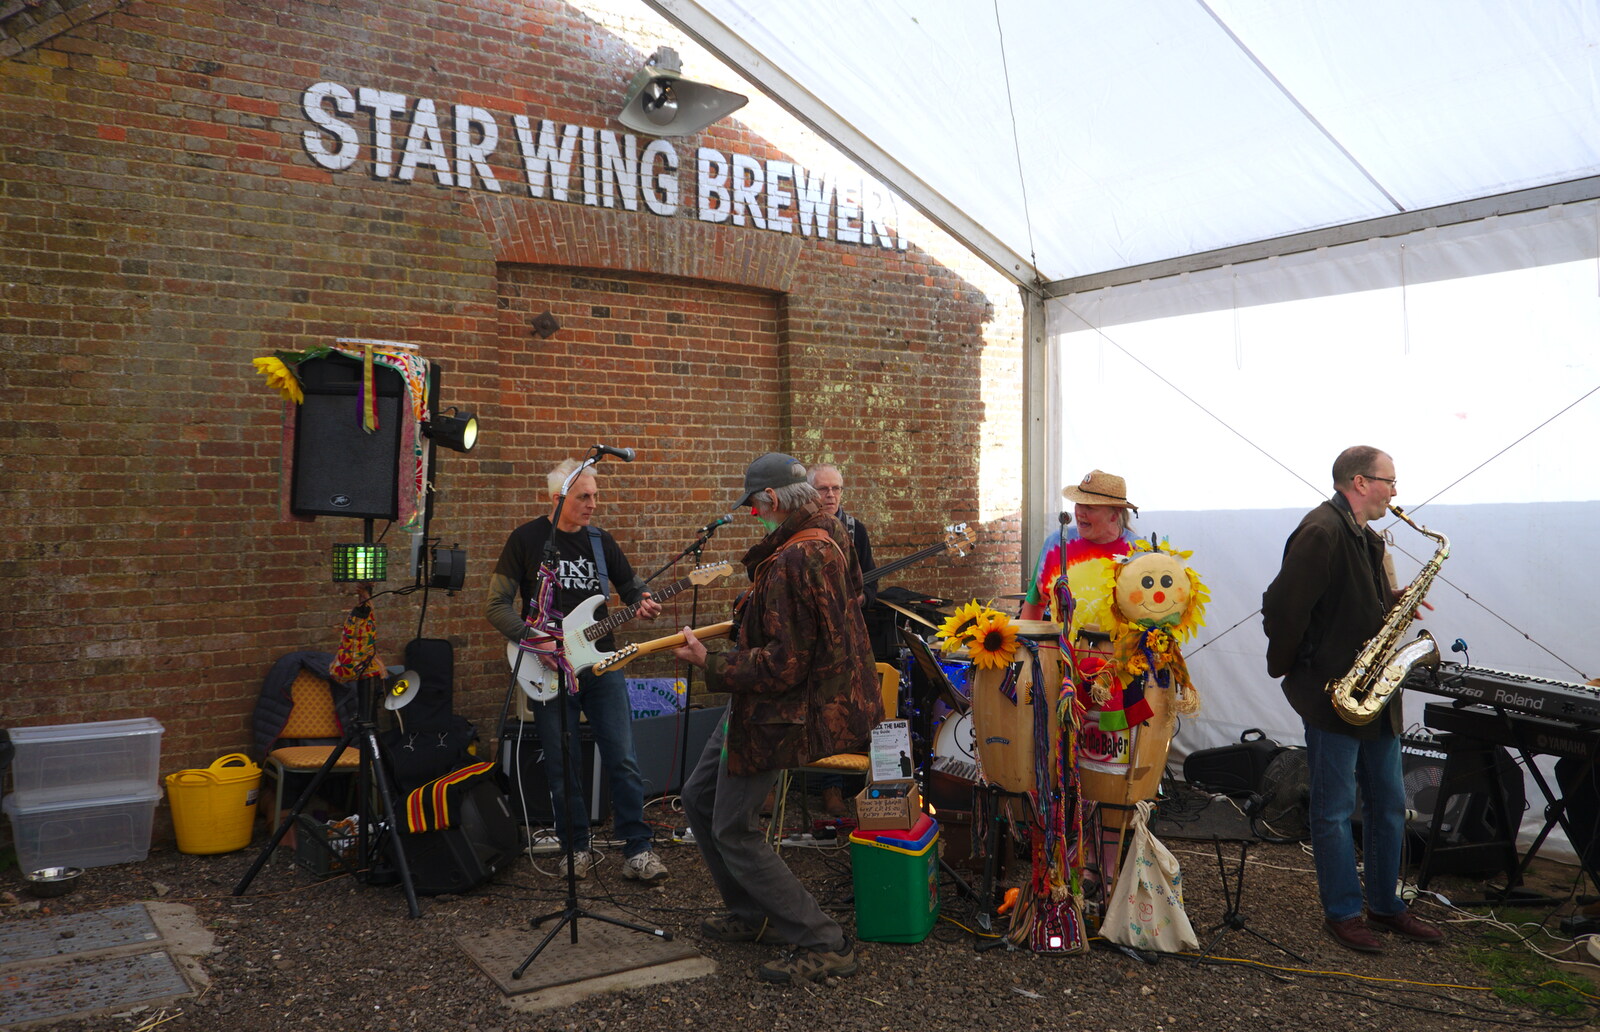 Mick the Baker band in the marquee from The Opening of Star Wing Brewery's Tap Room, Redgrave, Suffolk - 4th May 2019